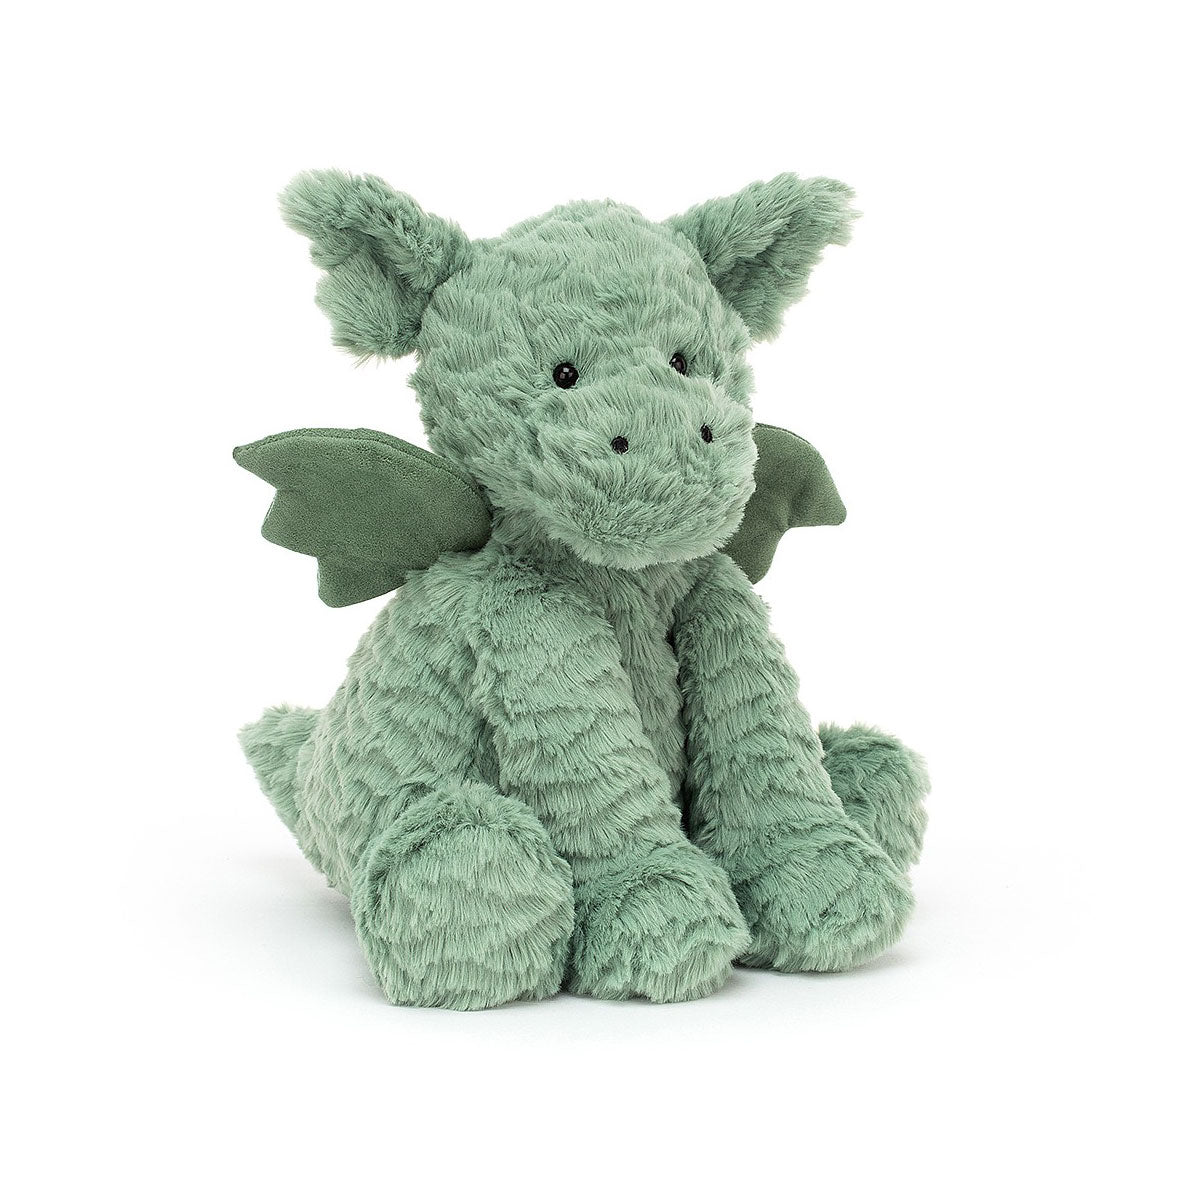 Fuddlewuddle Dragon from jellycat